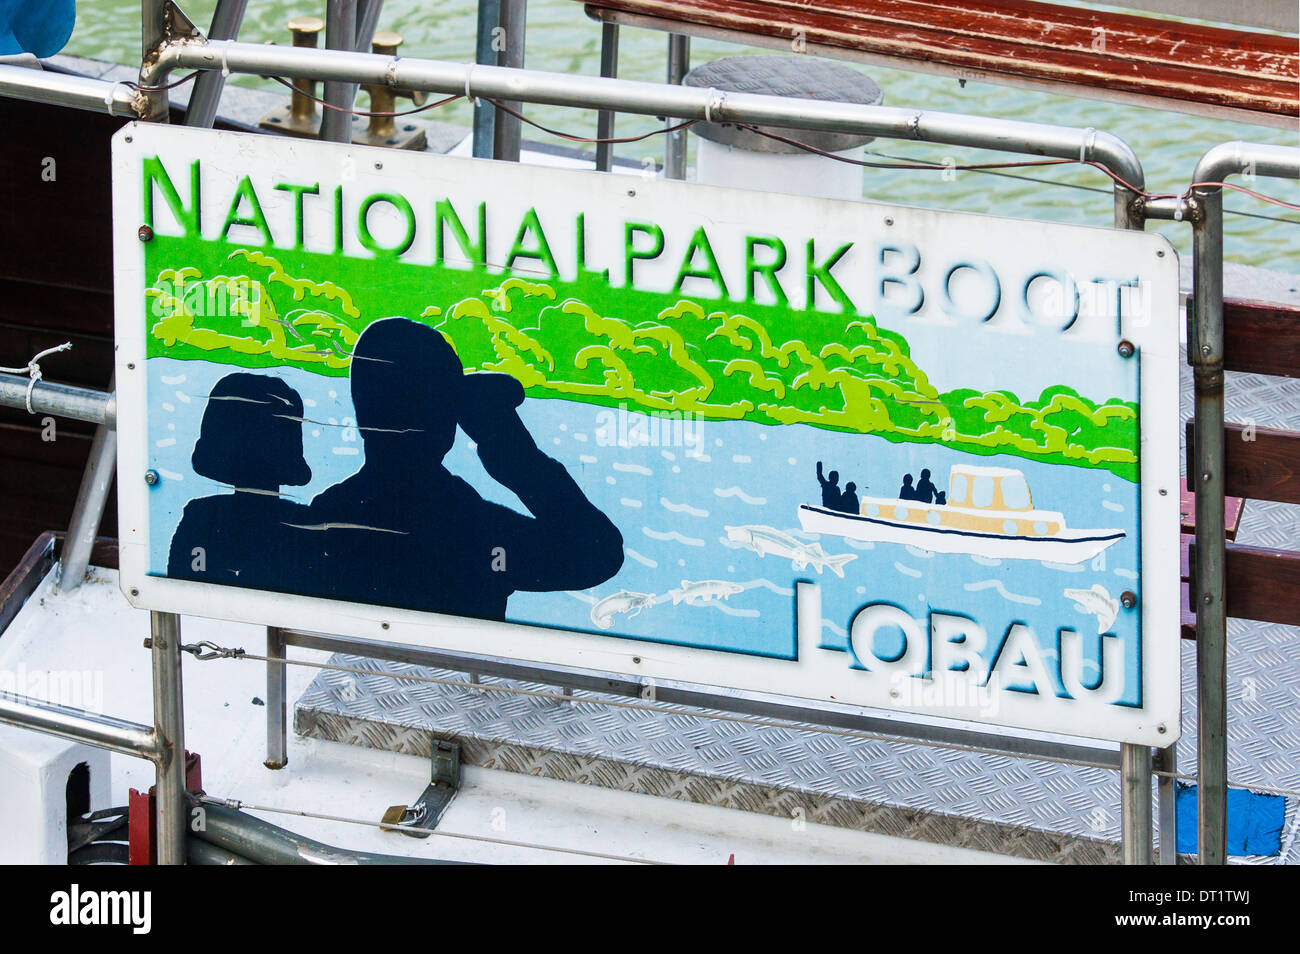 information signpost for the boat to the national park lobau at the moorings on the danube canal, vienna, austria Stock Photo